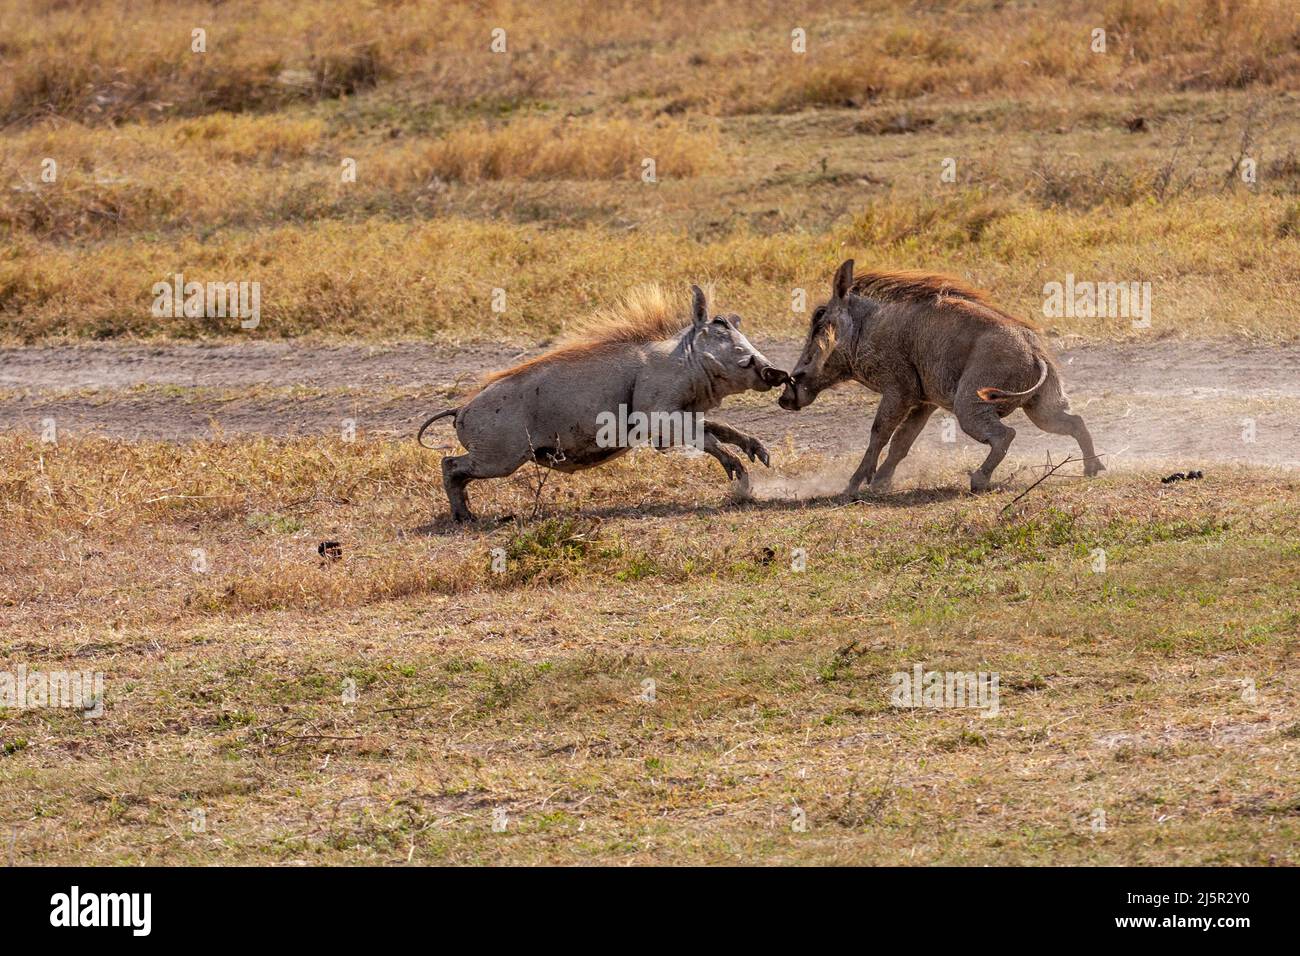 Warthog  (Phacochoerus africanus) males aggressively fight each other during mating season Stock Photo